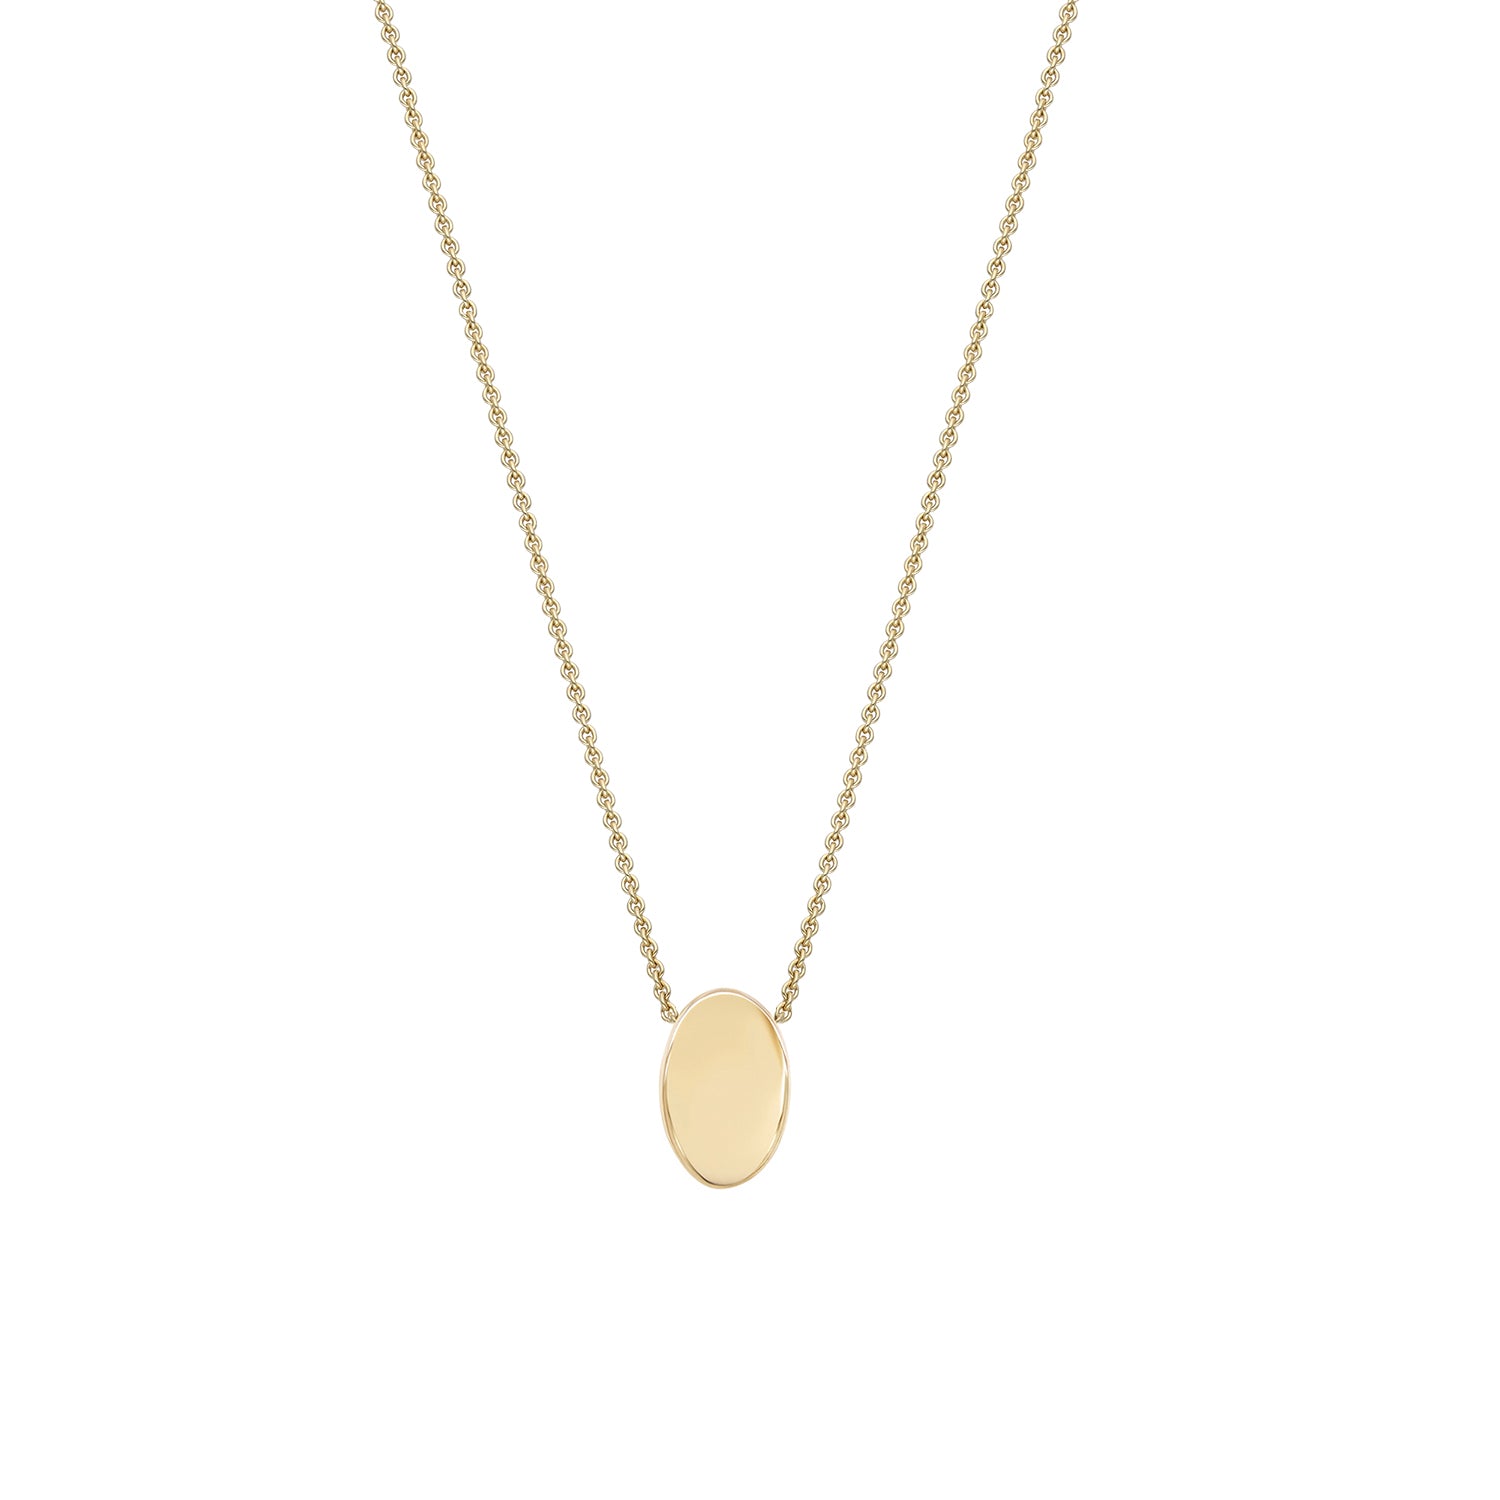 Solid gold necklace handmade in Ireland